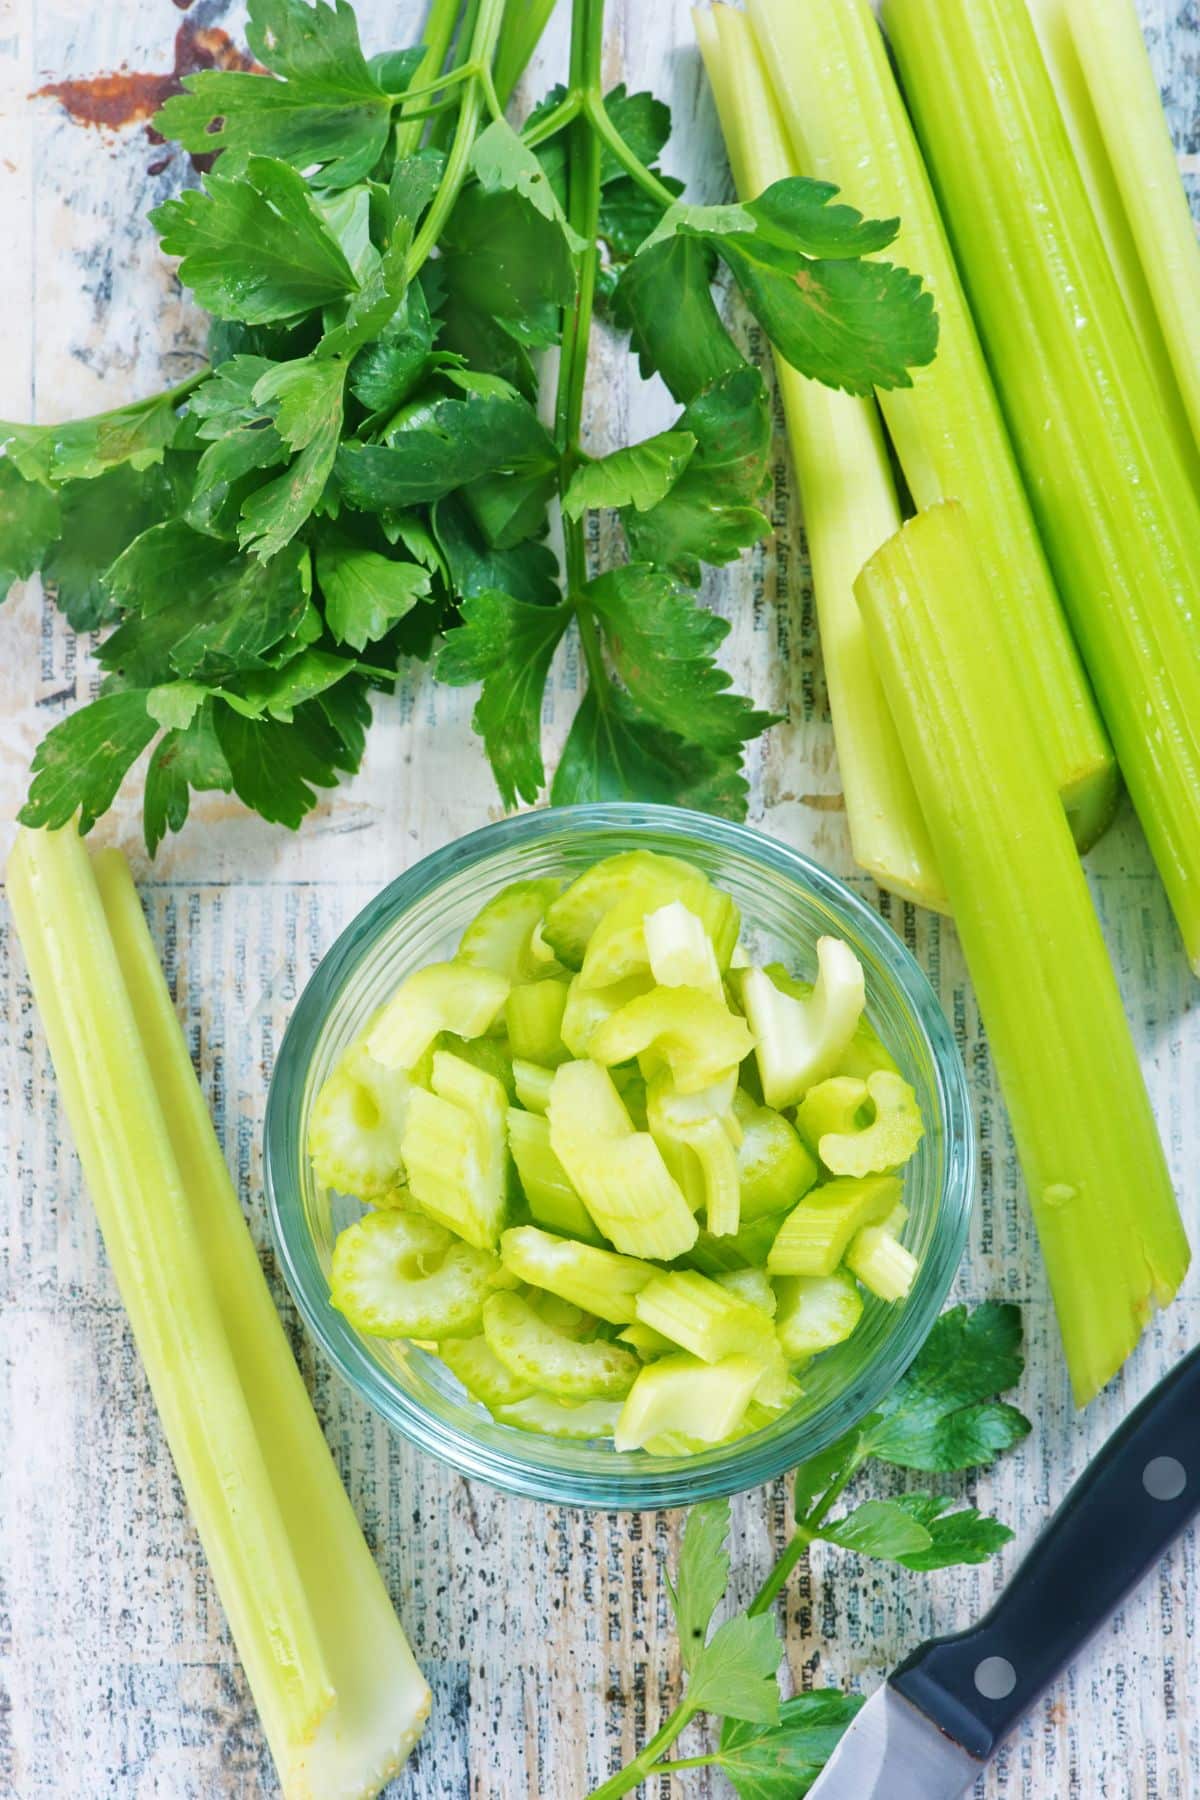 Sliced and chopped bowl of celery on white surface.